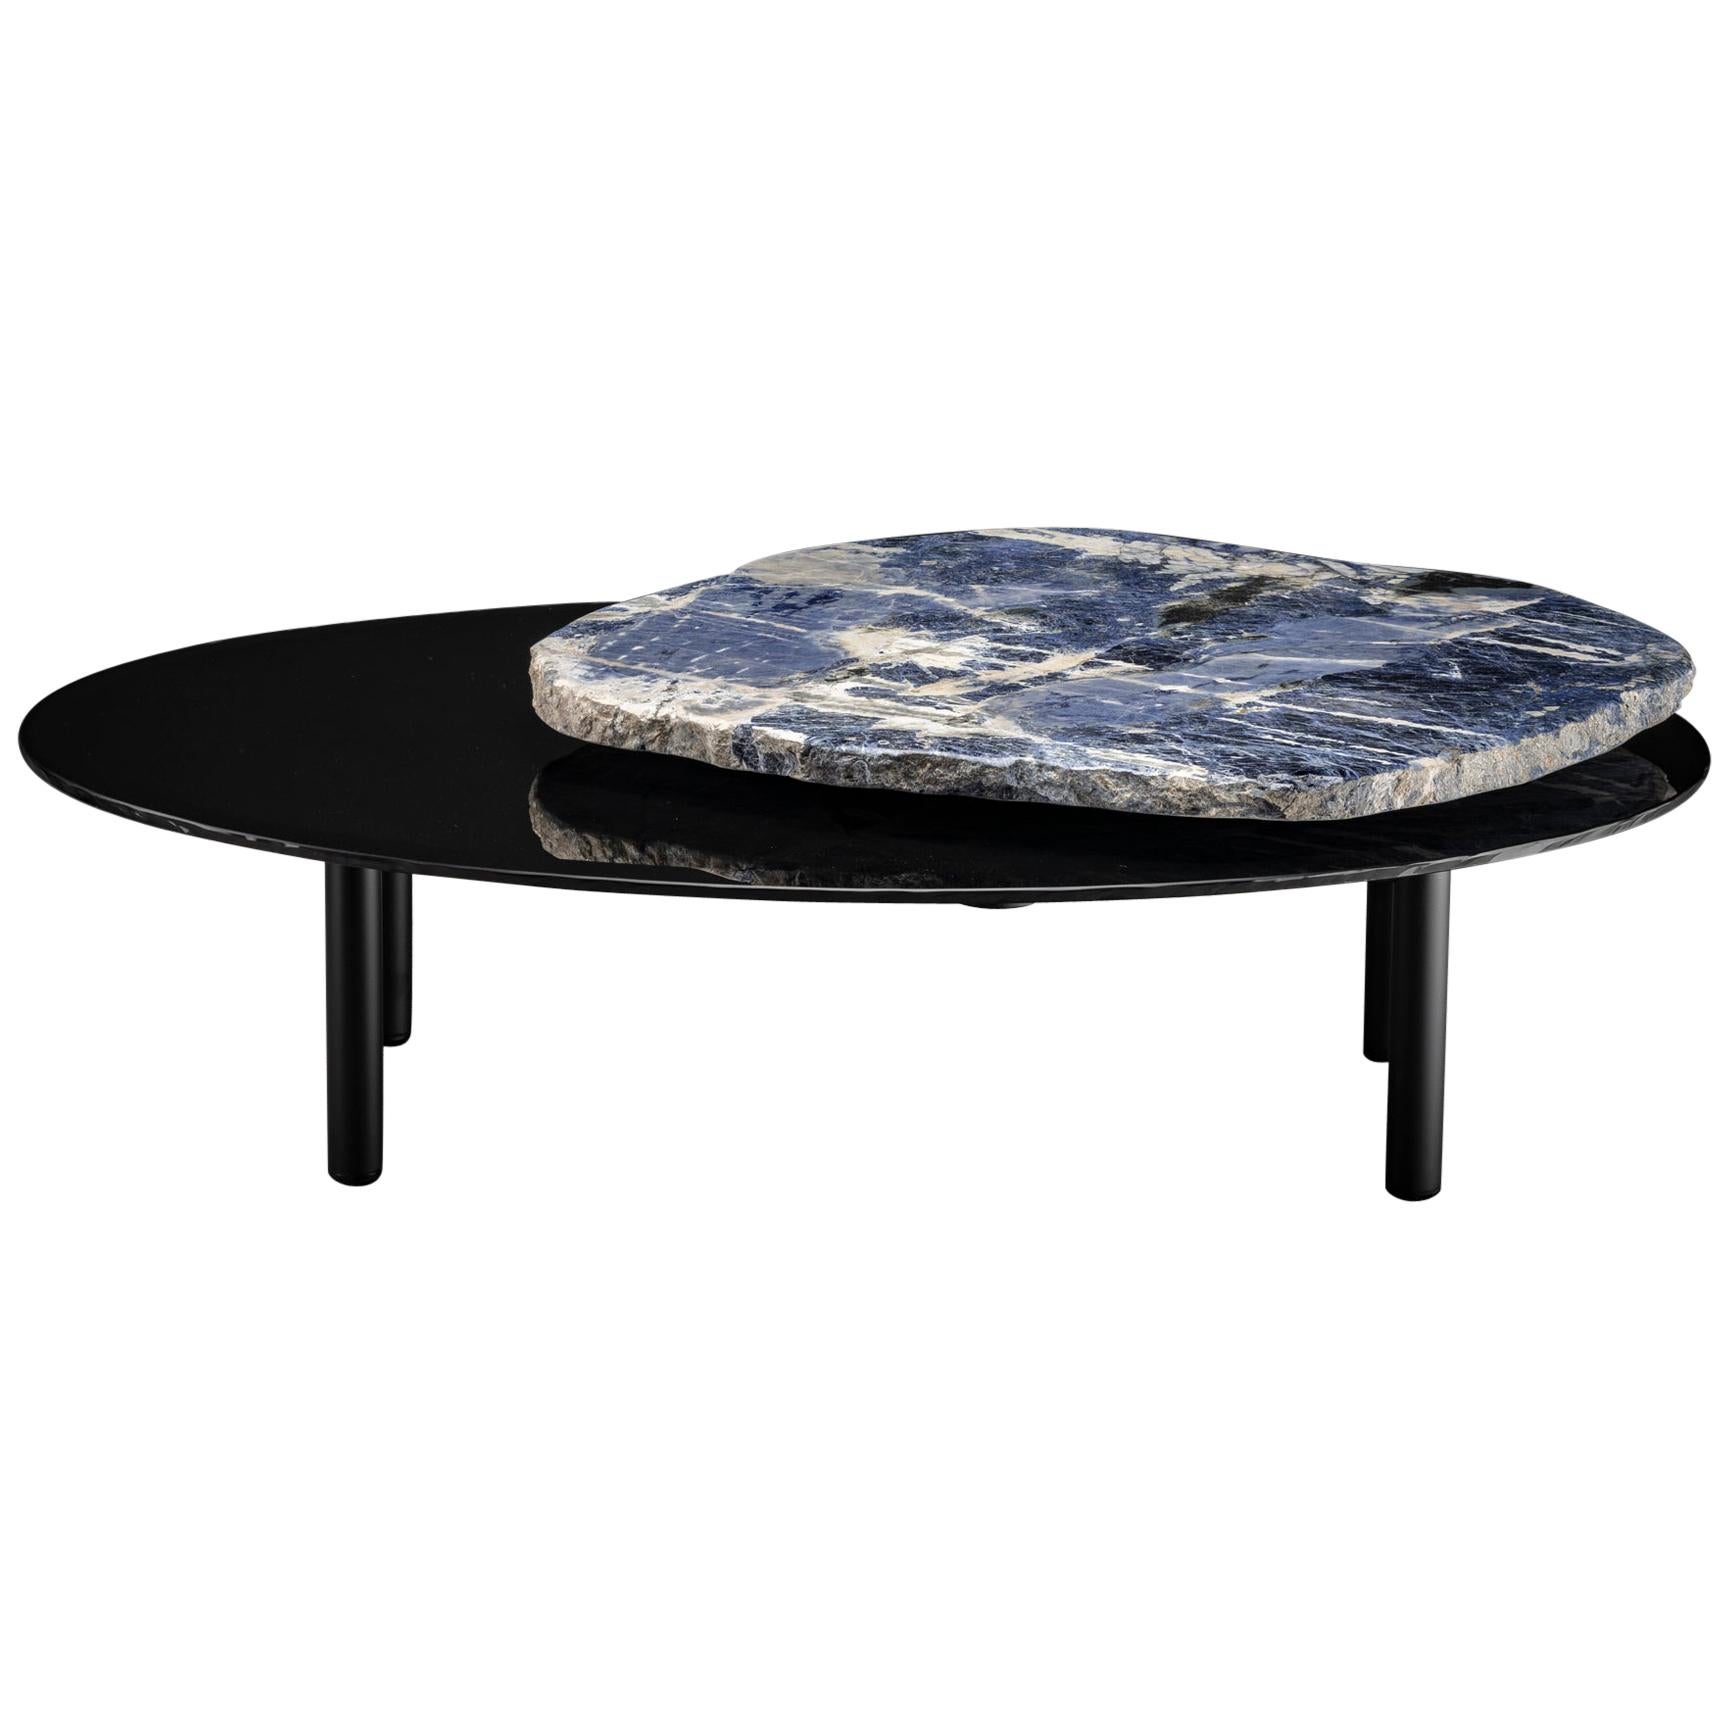 Center Table, with Rotating Brazilian Sodalite Slab on Black Tempered Glass